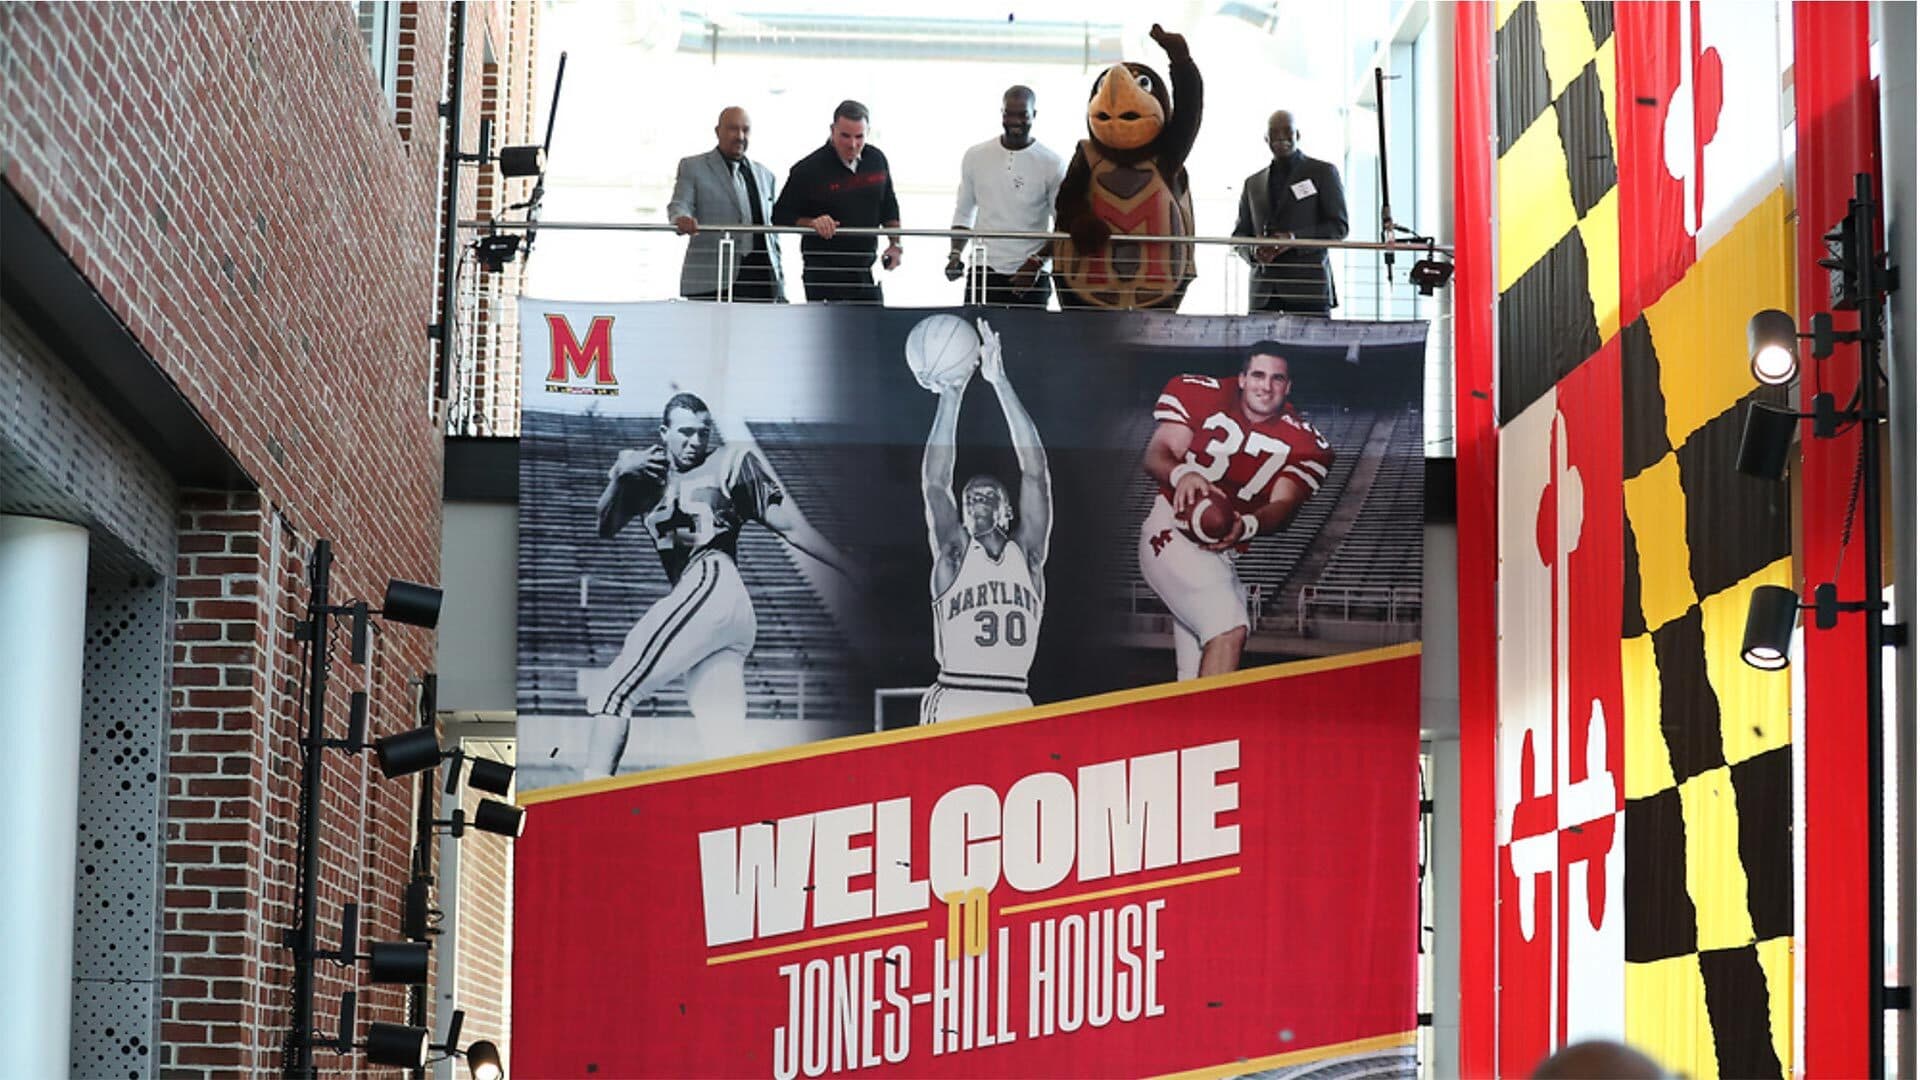 Jones-Hill House welcome banner unfurled